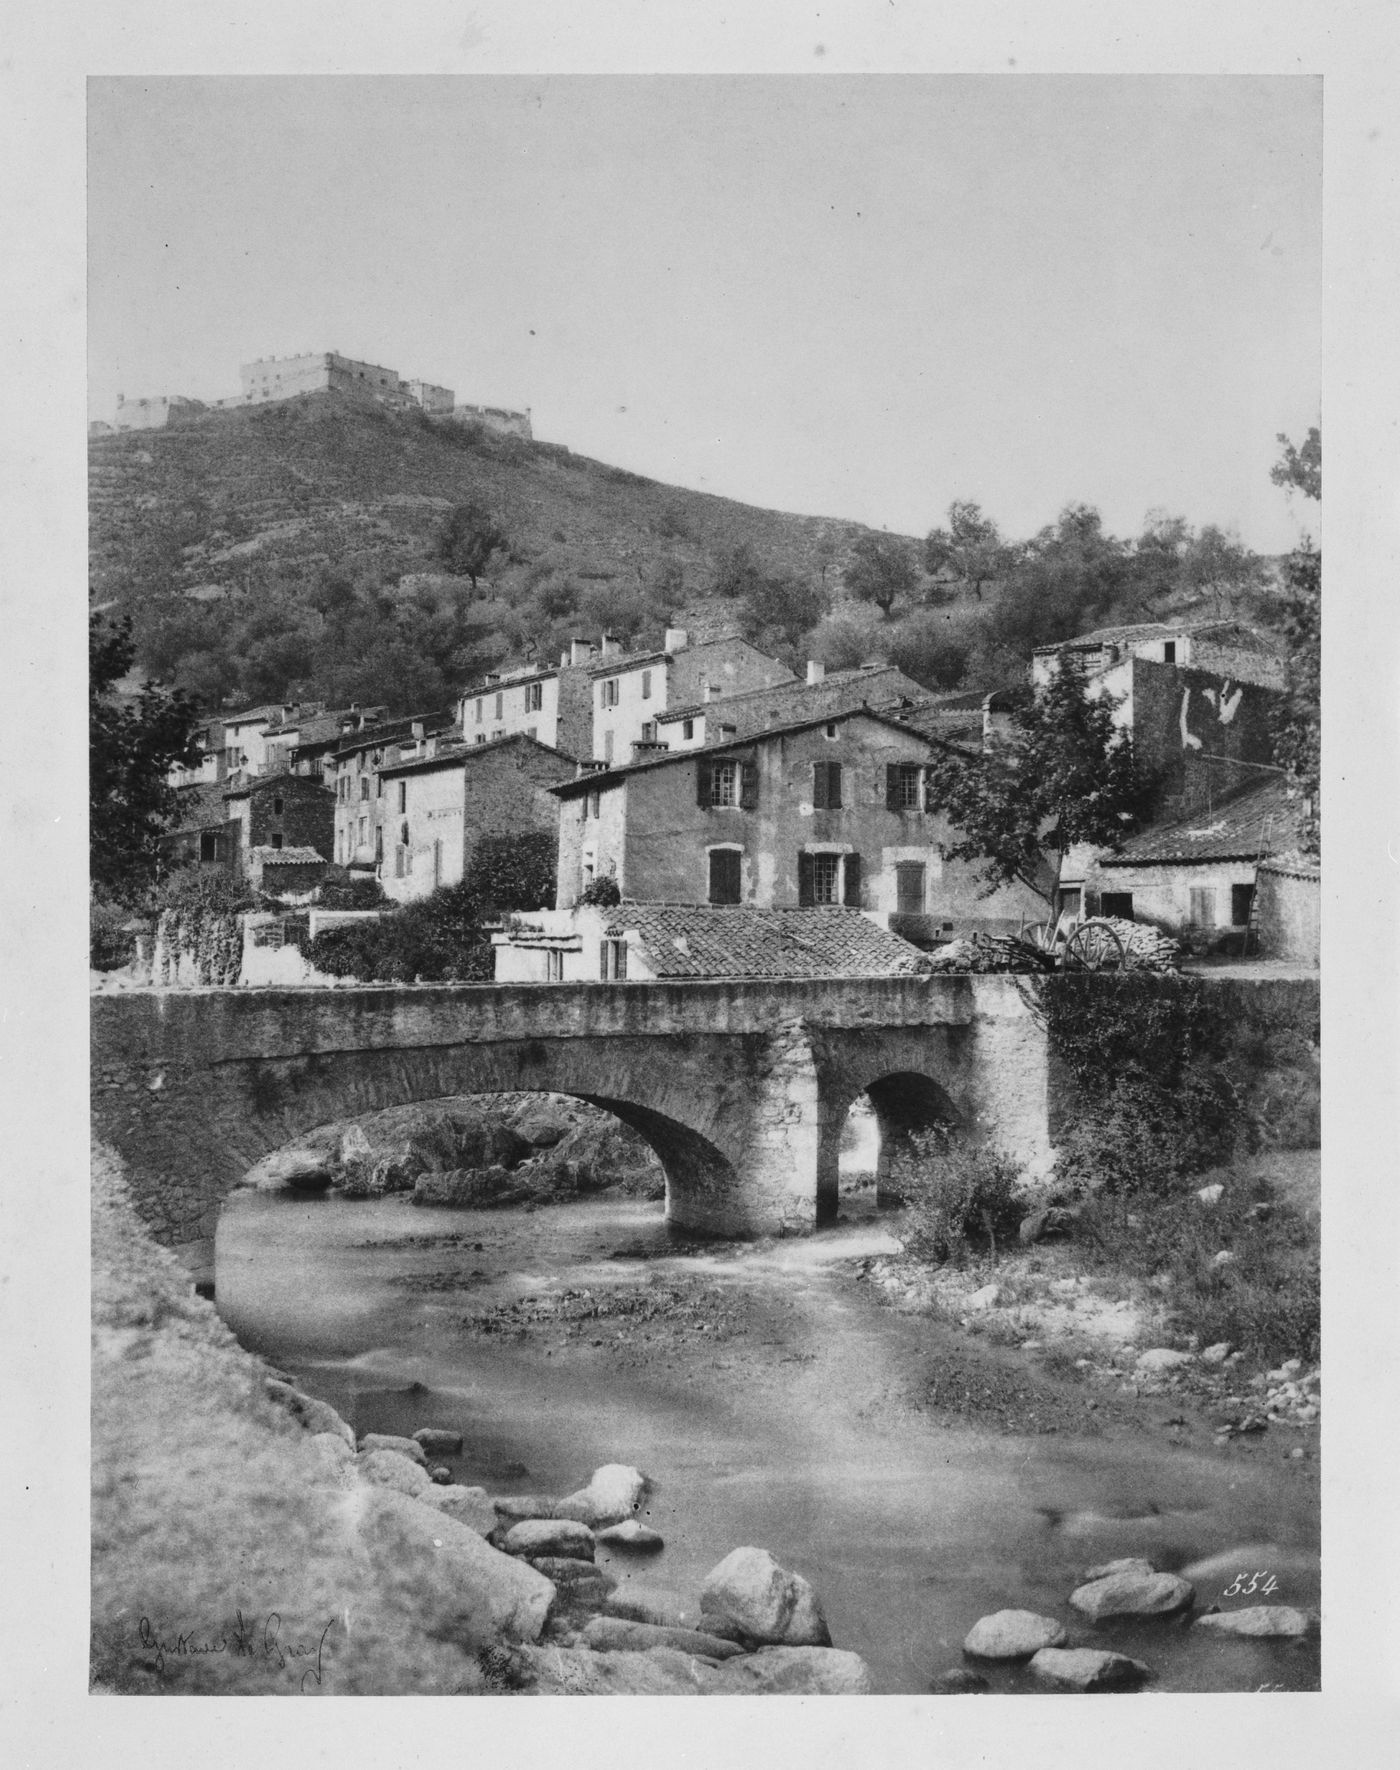 View of houses, with bridge and river in foreground, Amélie-les-Bains-Palada, France